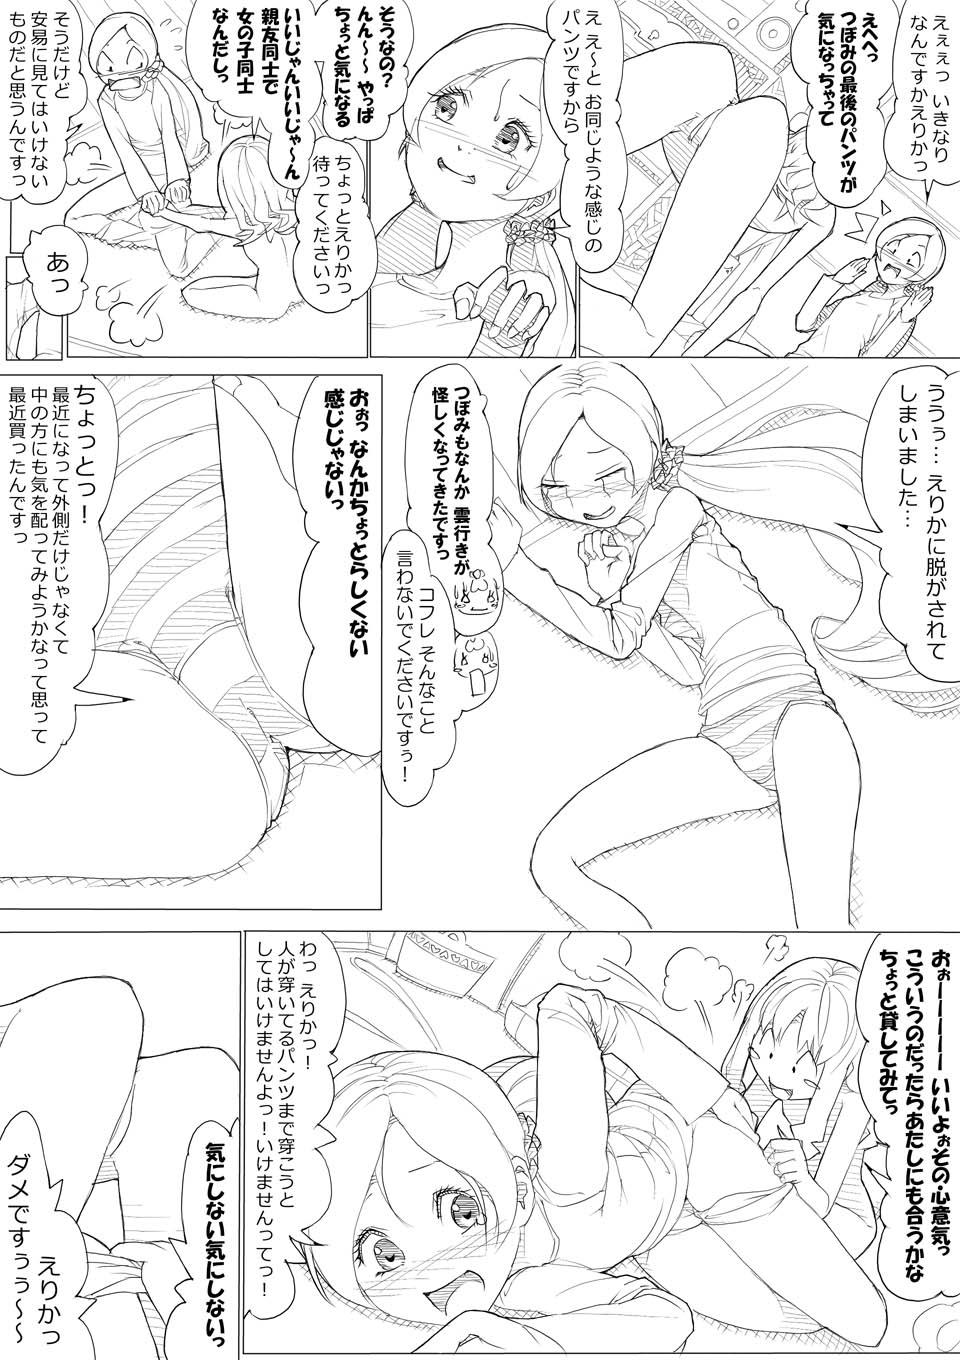 Old ハトプリ - Heartcatch precure Anal Sex - Page 11